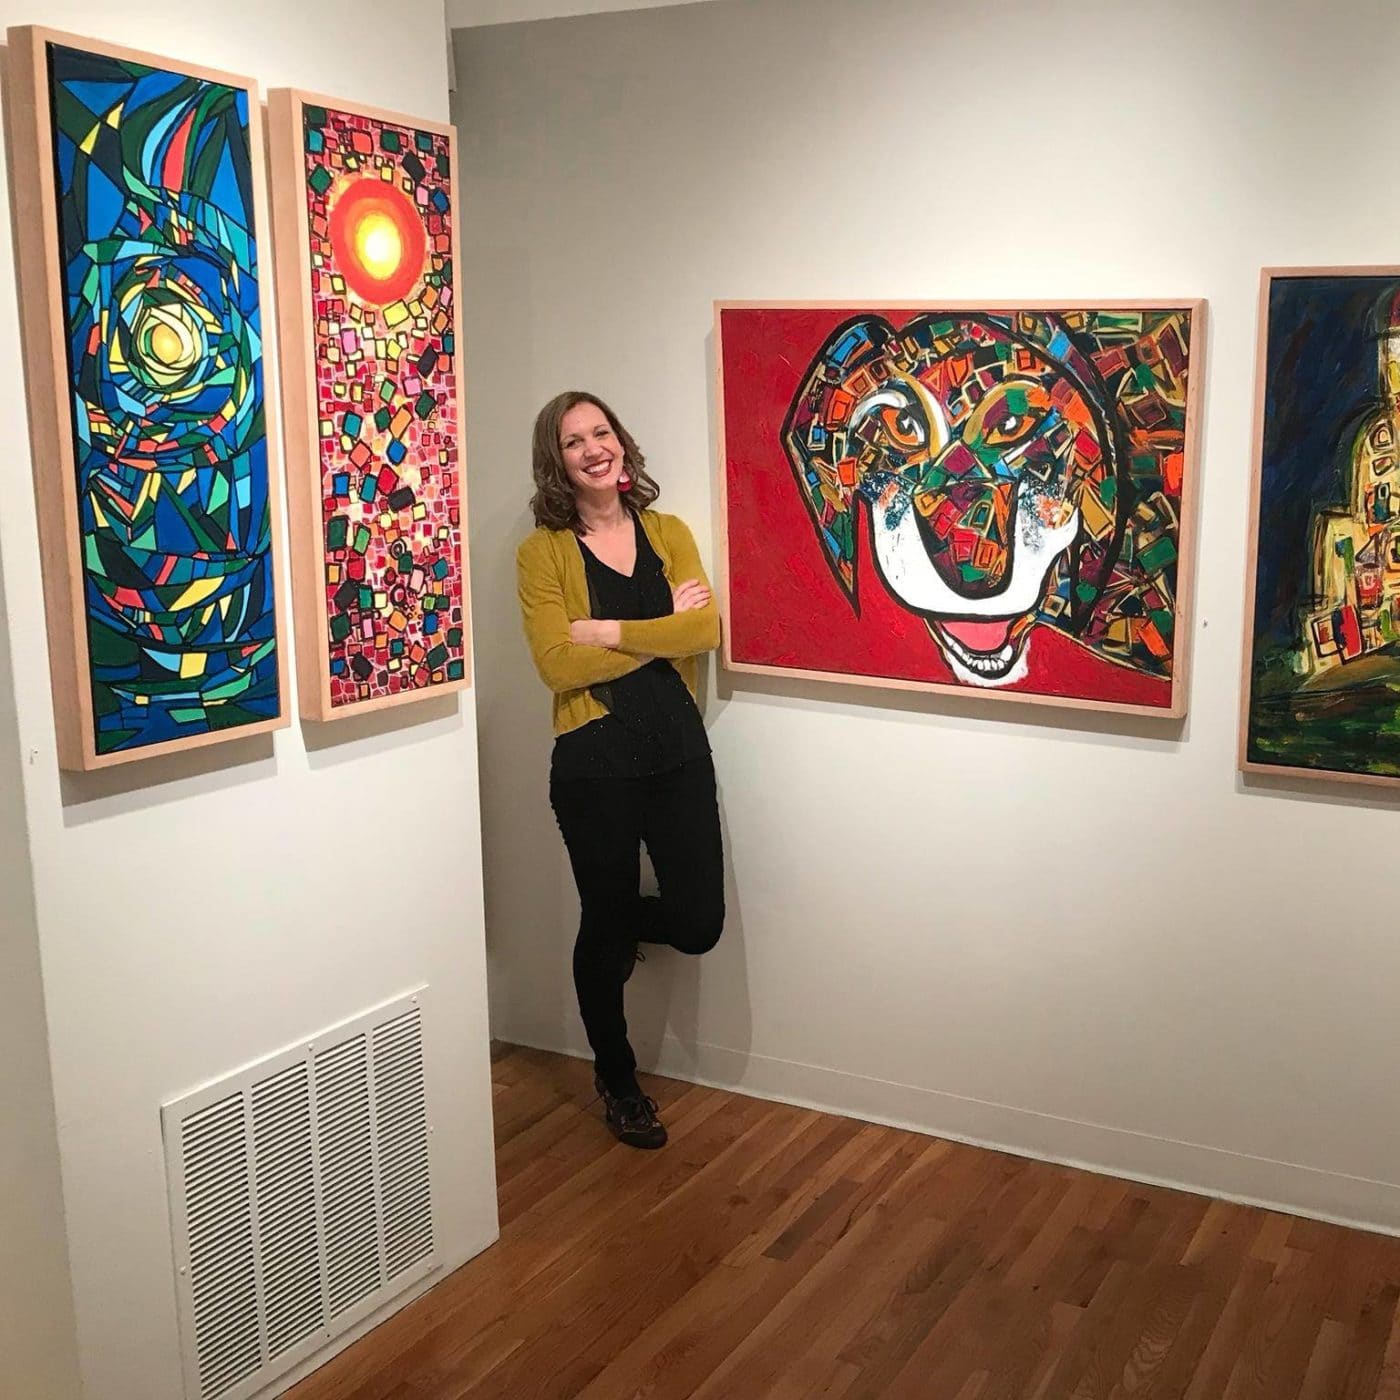 At My Art Show in NYC Januyary 2018 - NYC Art Show 2018